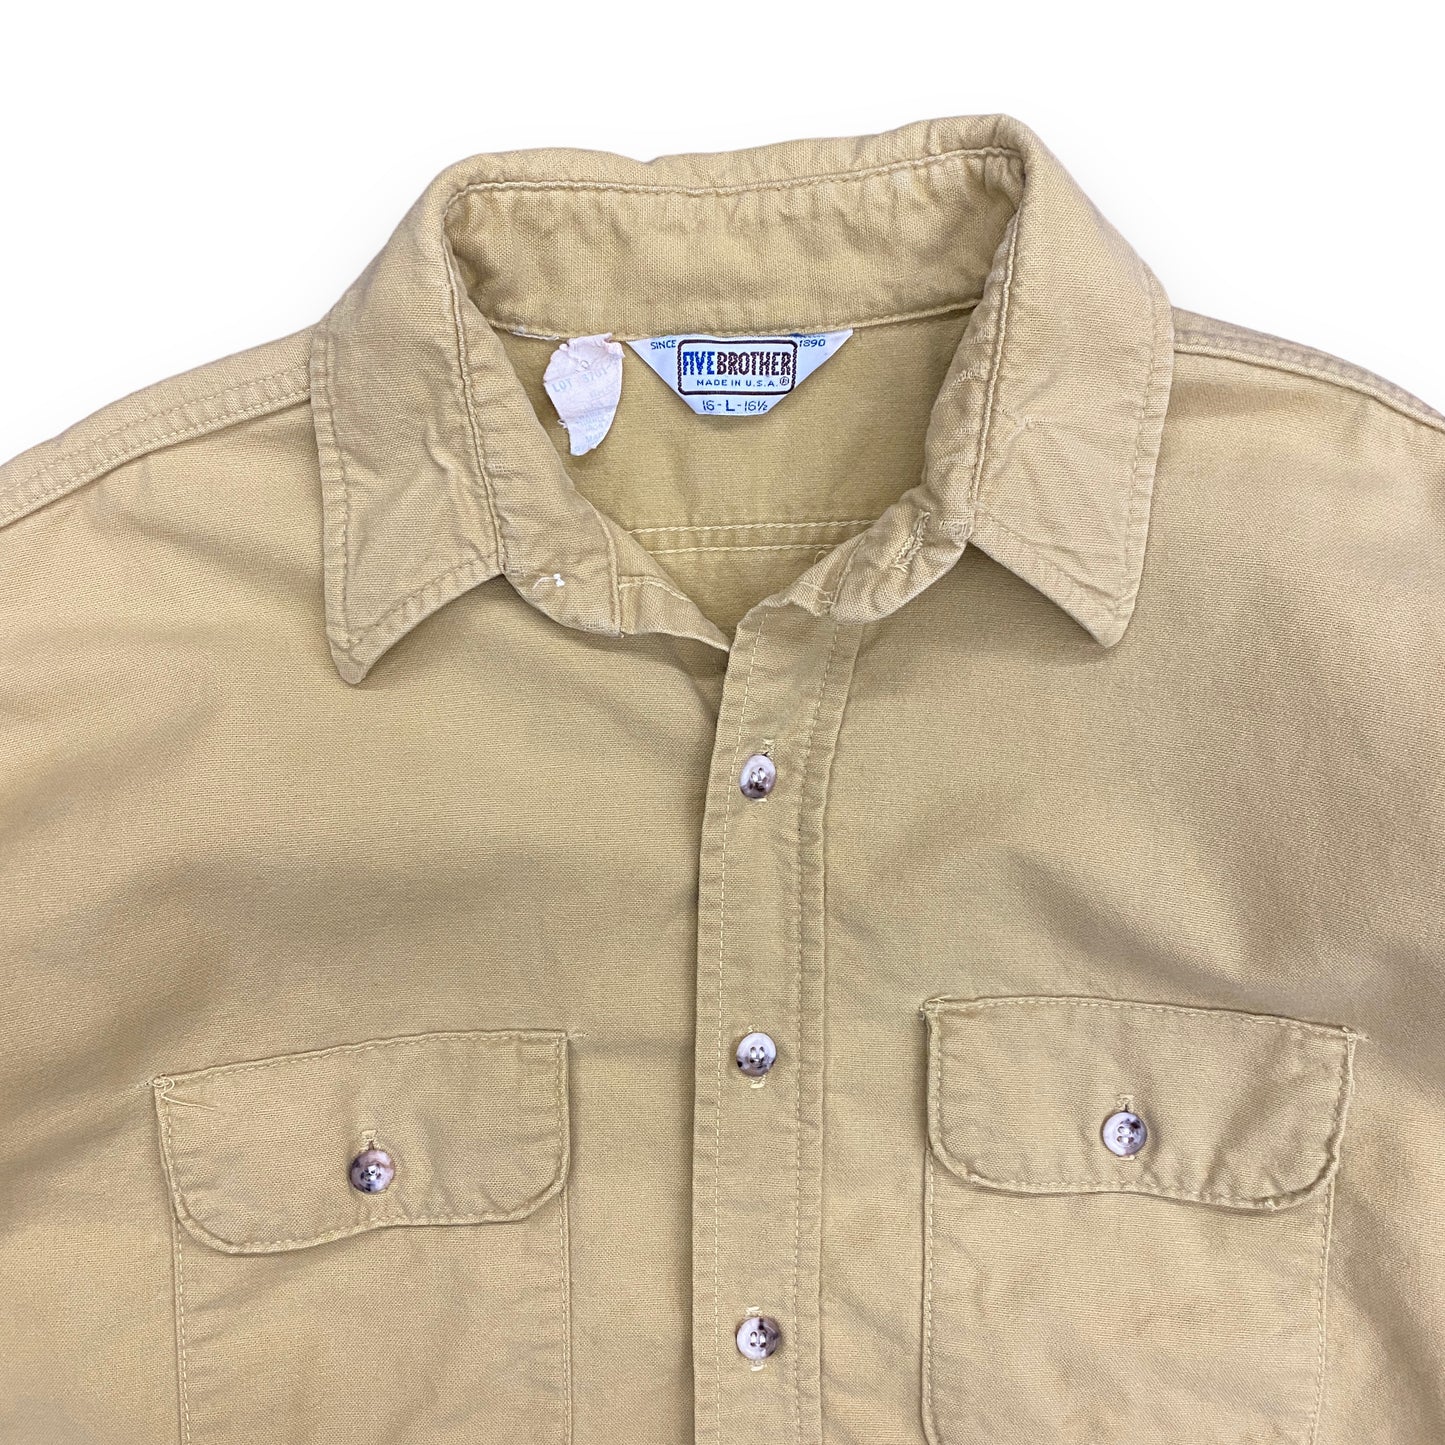 1980s Five Brother Tan Chamois Button Up Shirt - Size Large